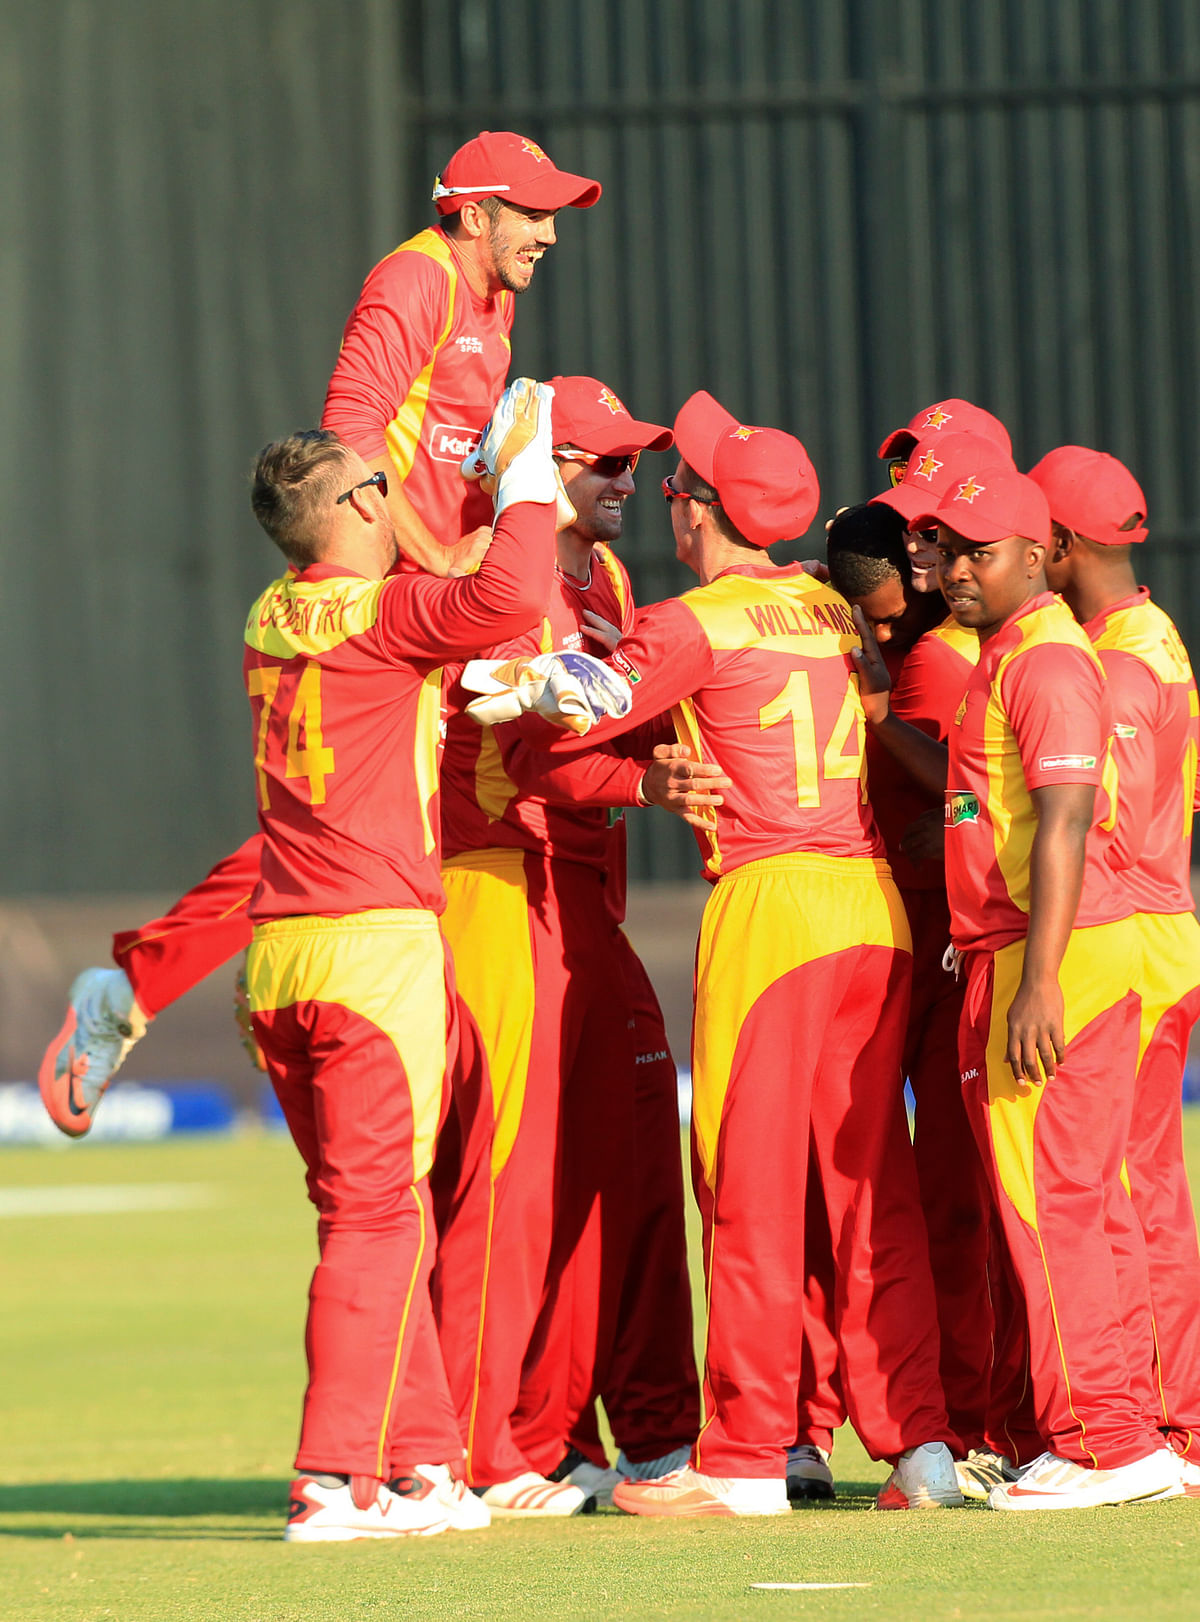 India lost to Zimbabwe by 10 runs in the second and final T20.